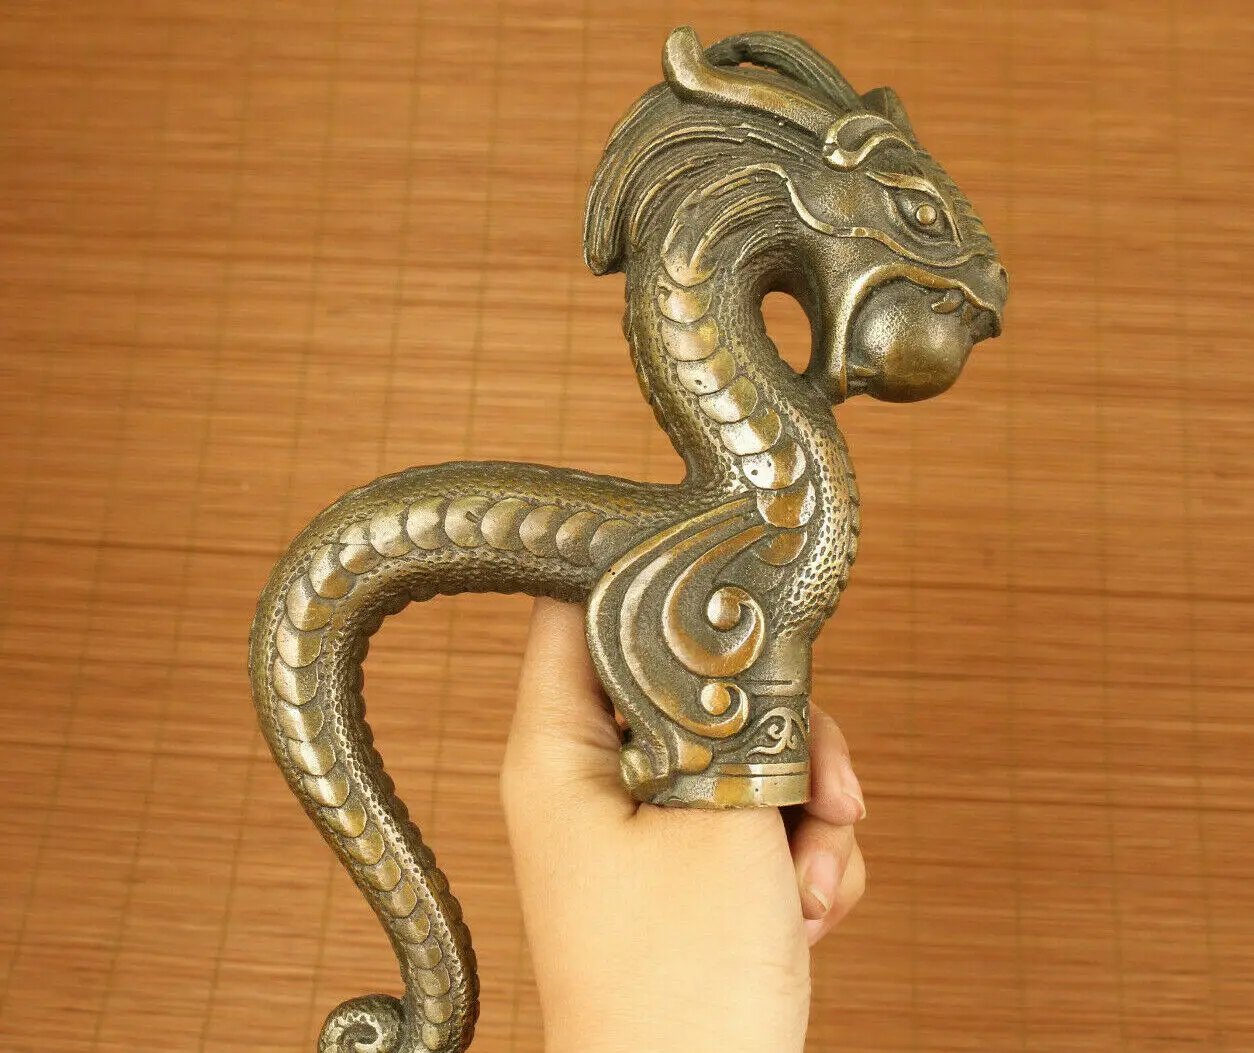 ese old bronze hand carved dragon statue figure walking stick head